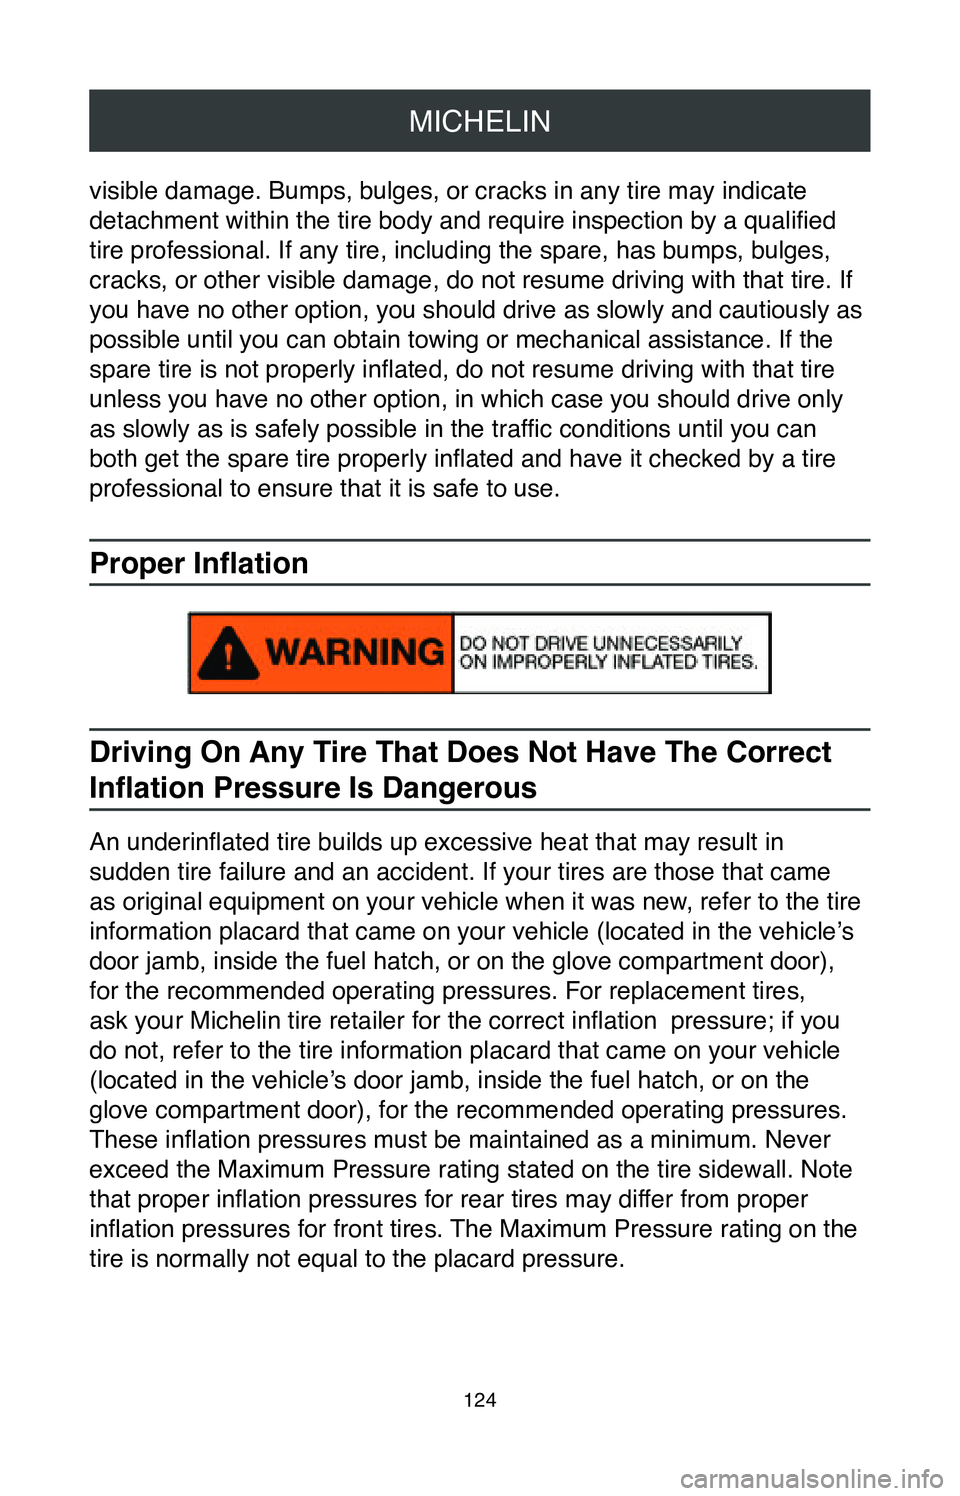 TOYOTA AVALON HYBRID 2020  Warranties & Maintenance Guides (in English) MICHELIN
124
visible damage. Bumps, bulges, or cracks in any tire may indicate 
detachment within the tire body and require inspection by a qualified 
tire professional. If any tire, including the spa